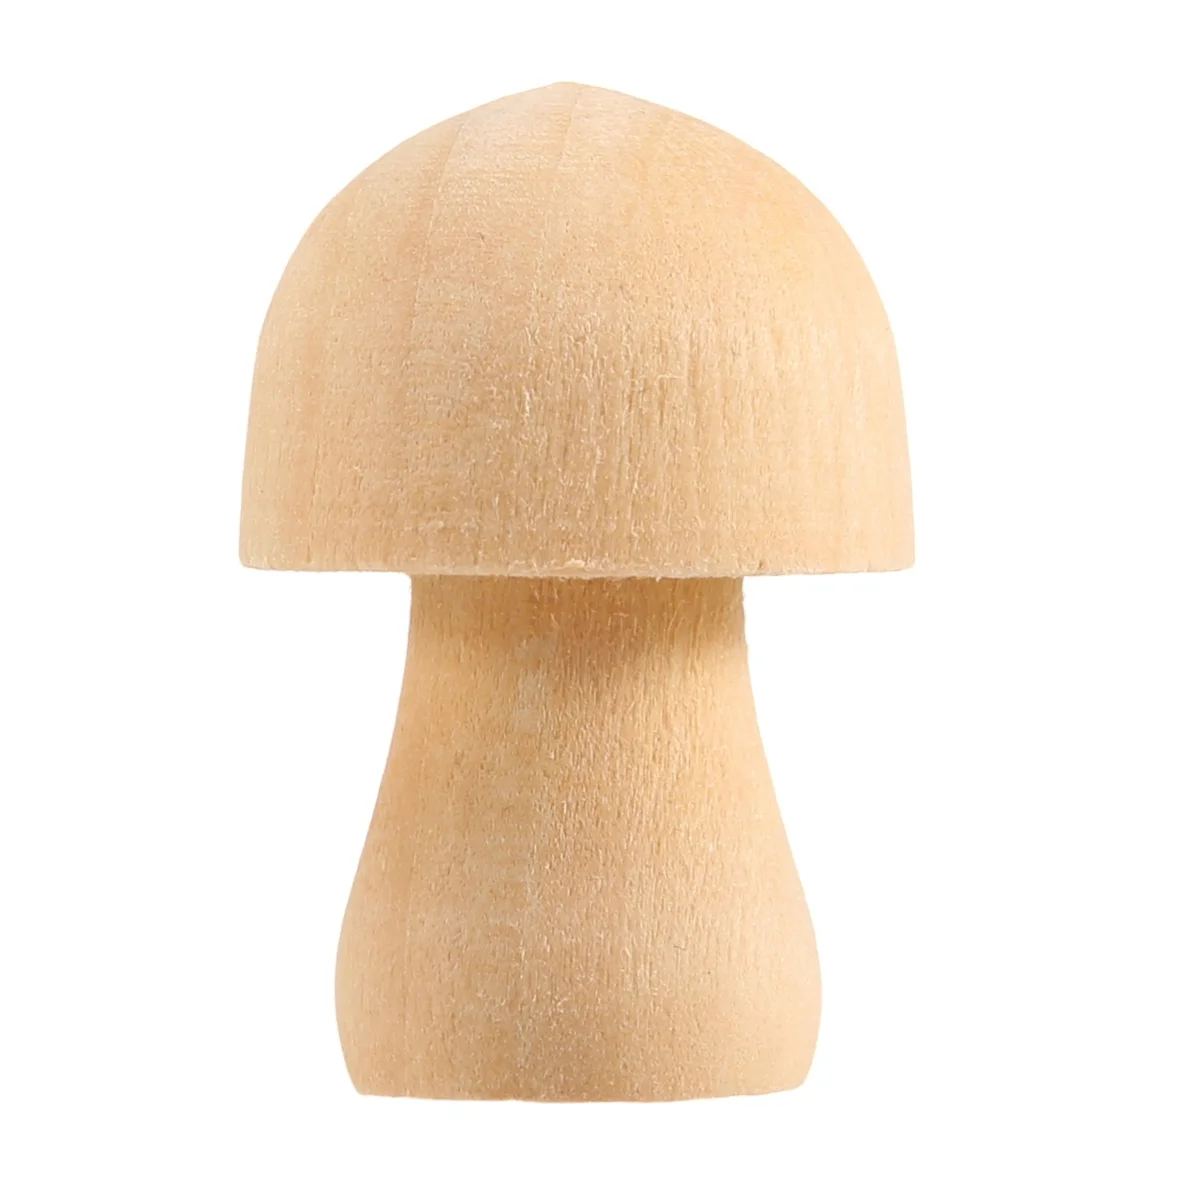 

18 Pieces Unfinished Wooden Mushroom 6 Sizes of Natural Wooden Mushrooms for Arts & Crafts Projects Decoration